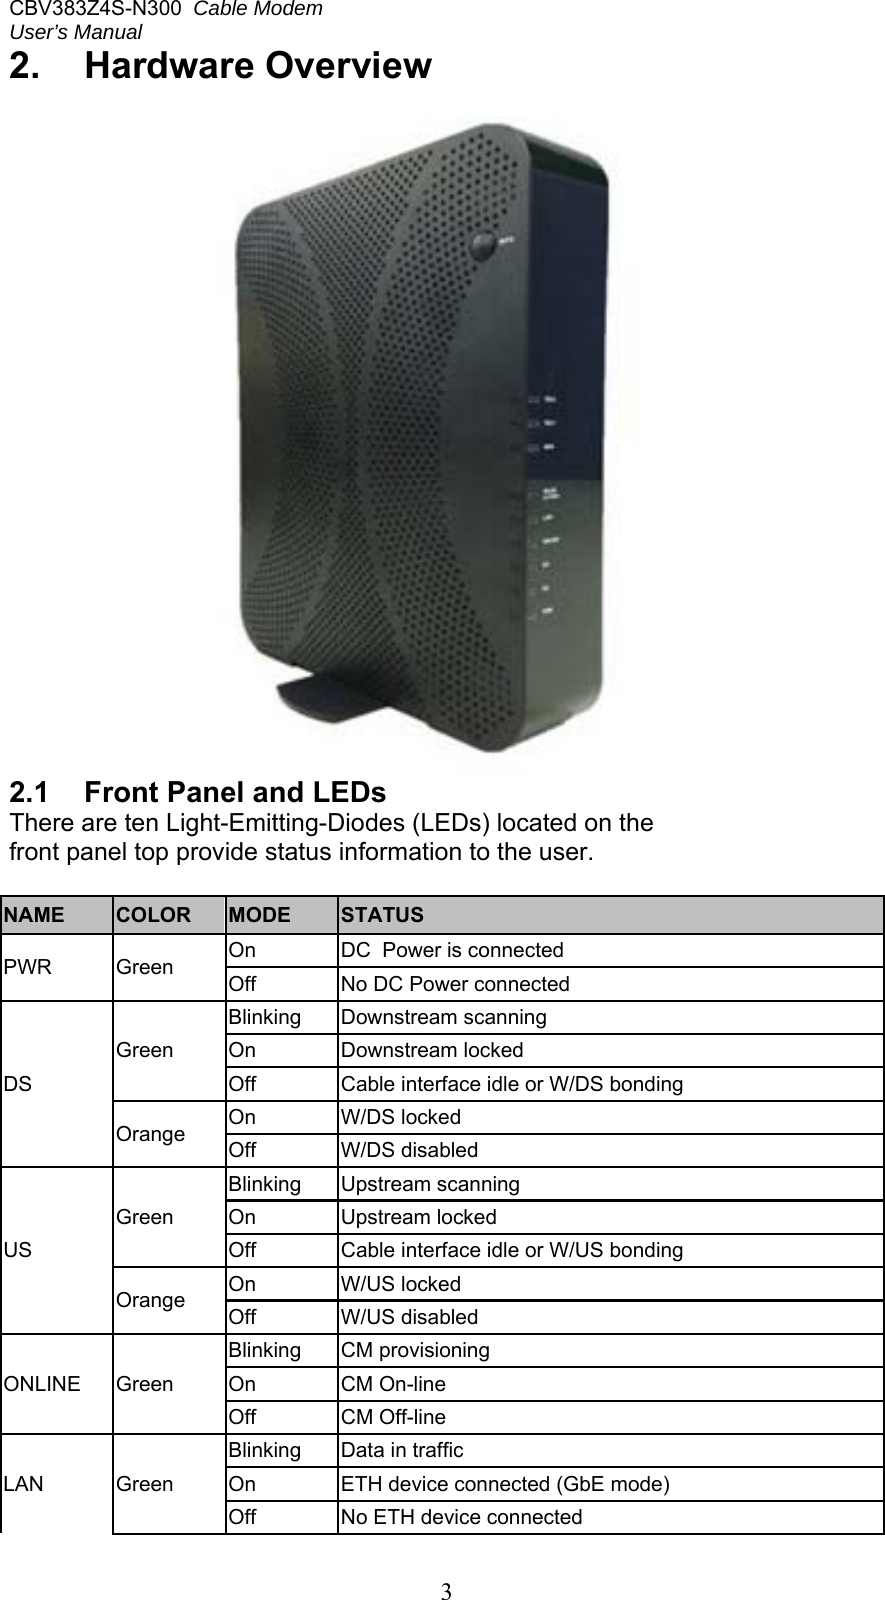 CBV383Z4S-N300  Cable Modem  User’s Manual   32.  Hardware Overview   2.1  Front Panel and LEDs There are ten Light-Emitting-Diodes (LEDs) located on the  front panel top provide status information to the user.  NAME   COLOR   MODE   STATUS  PWR   Green   On   DC  Power is connected Off   No DC Power connected DS Green Blinking  Downstream scanning On   Downstream locked Off   Cable interface idle or W/DS bonding Orange  On  W/DS locked Off  W/DS disabled  US Green Blinking  Upstream scanning On   Upstream locked Off   Cable interface idle or W/US bonding Orange  On  W/US locked Off  W/US disabled  ONLINE  Green Blinking  CM provisioning  On   CM On-line Off   CM Off-line LAN  Green  Blinking  Data in traffic On   ETH device connected (GbE mode) Off   No ETH device connected  